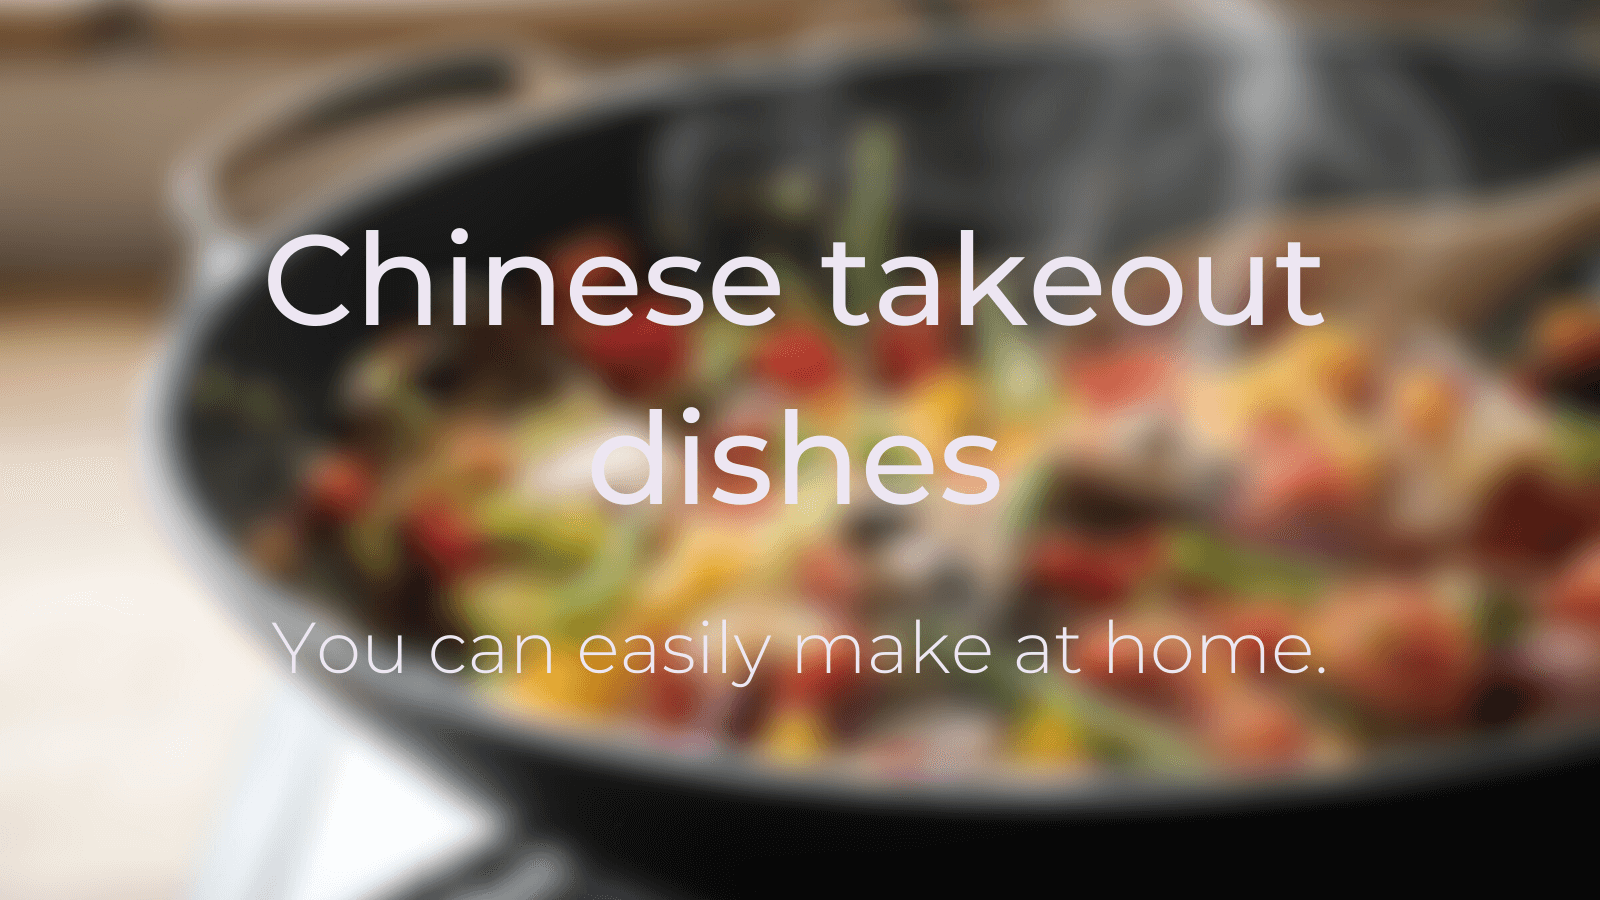 https://getclipdish.com/wp-content/uploads/2021/03/Chinese-Take-out-dishes.png